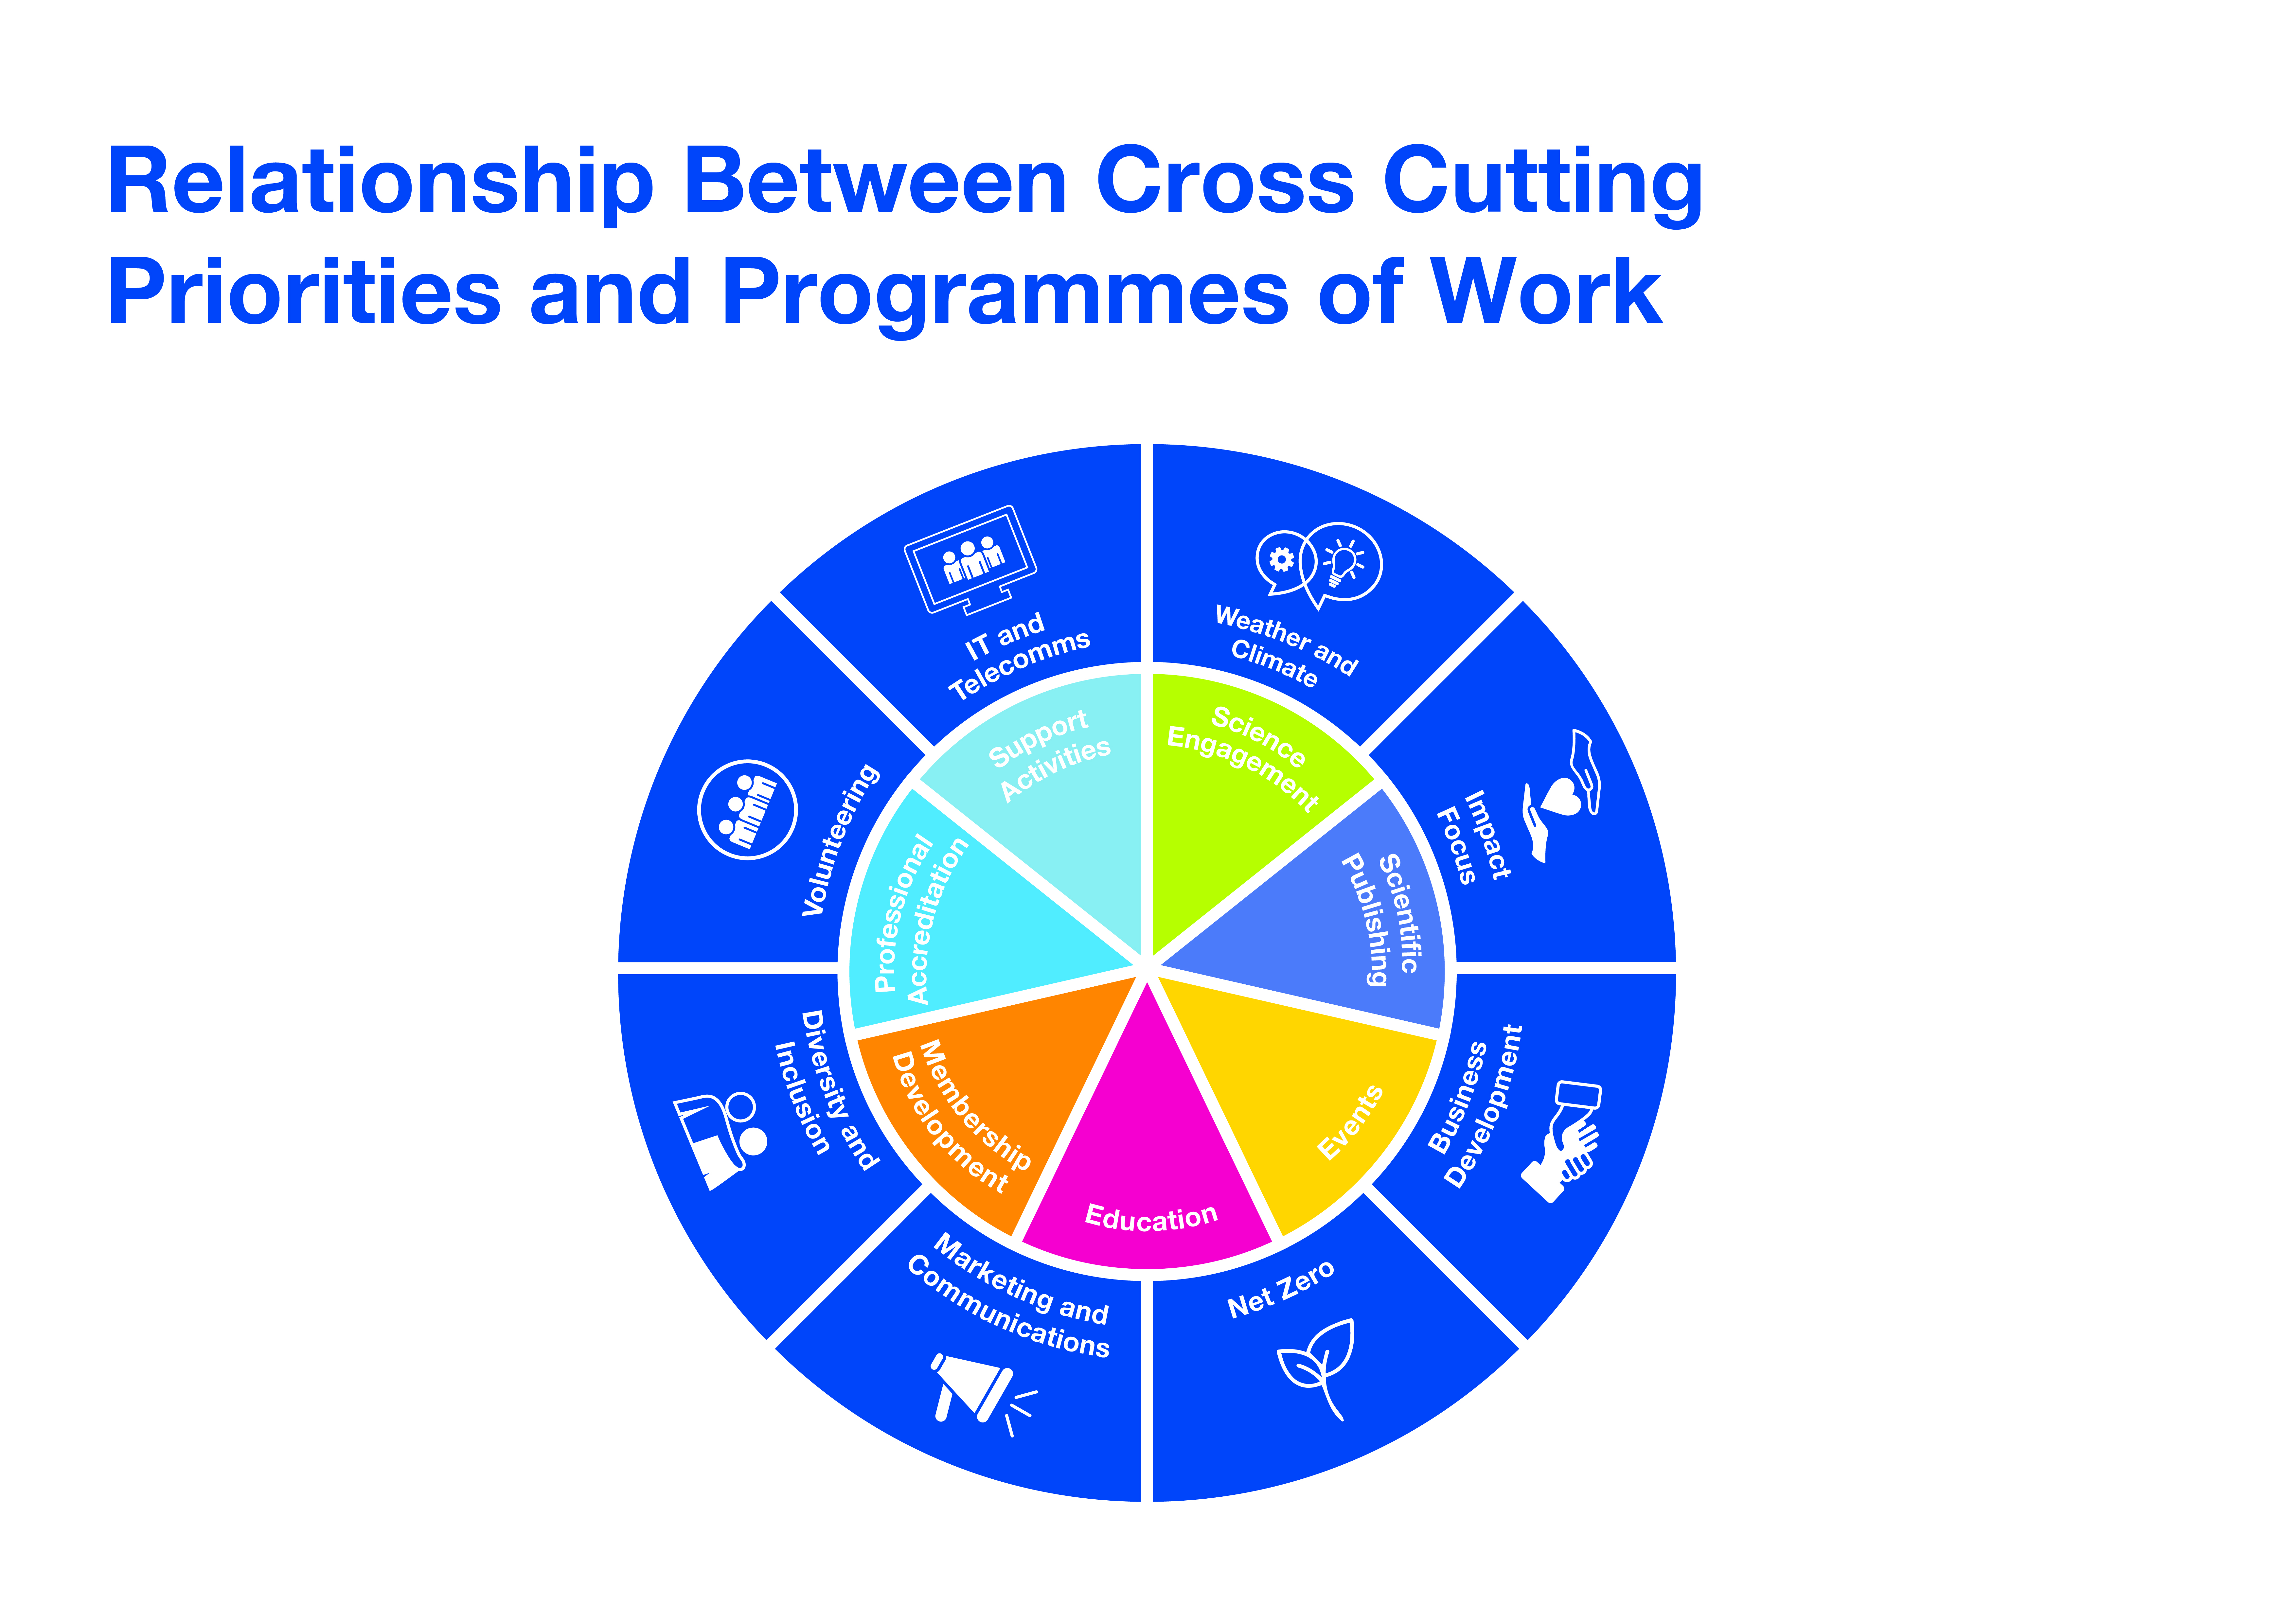 RMetS cross cutting priorities and programmes of work chart